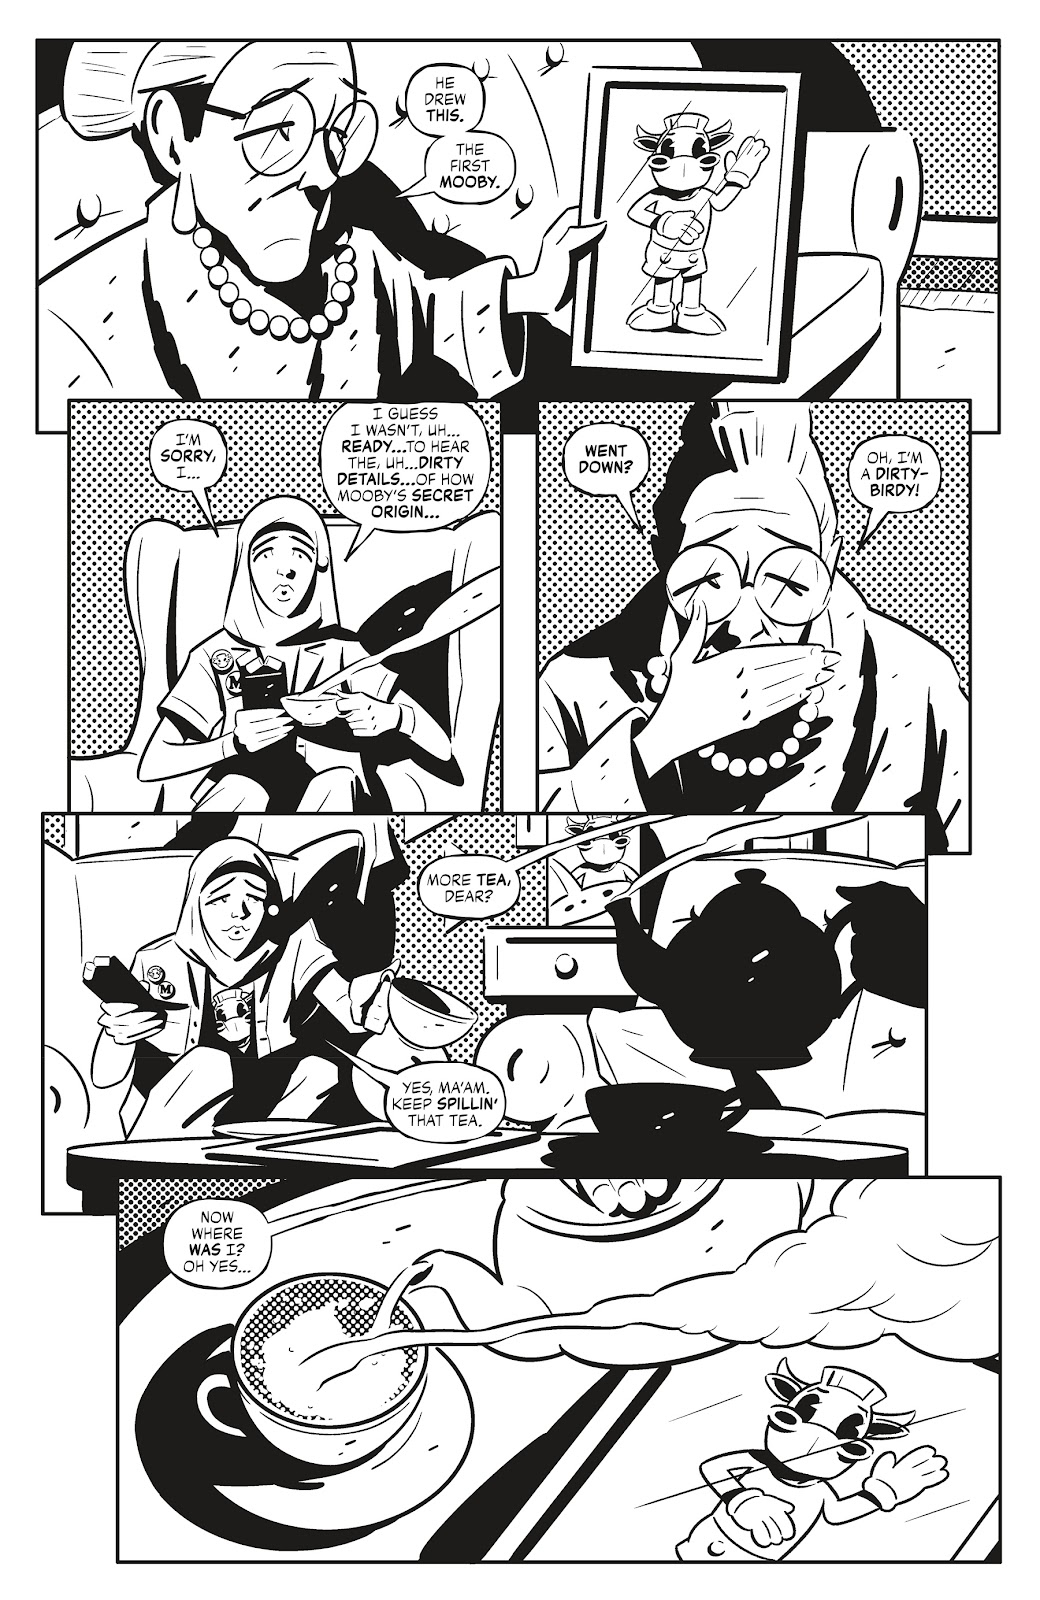 Quick Stops Vol. 2 issue 1 - Page 11